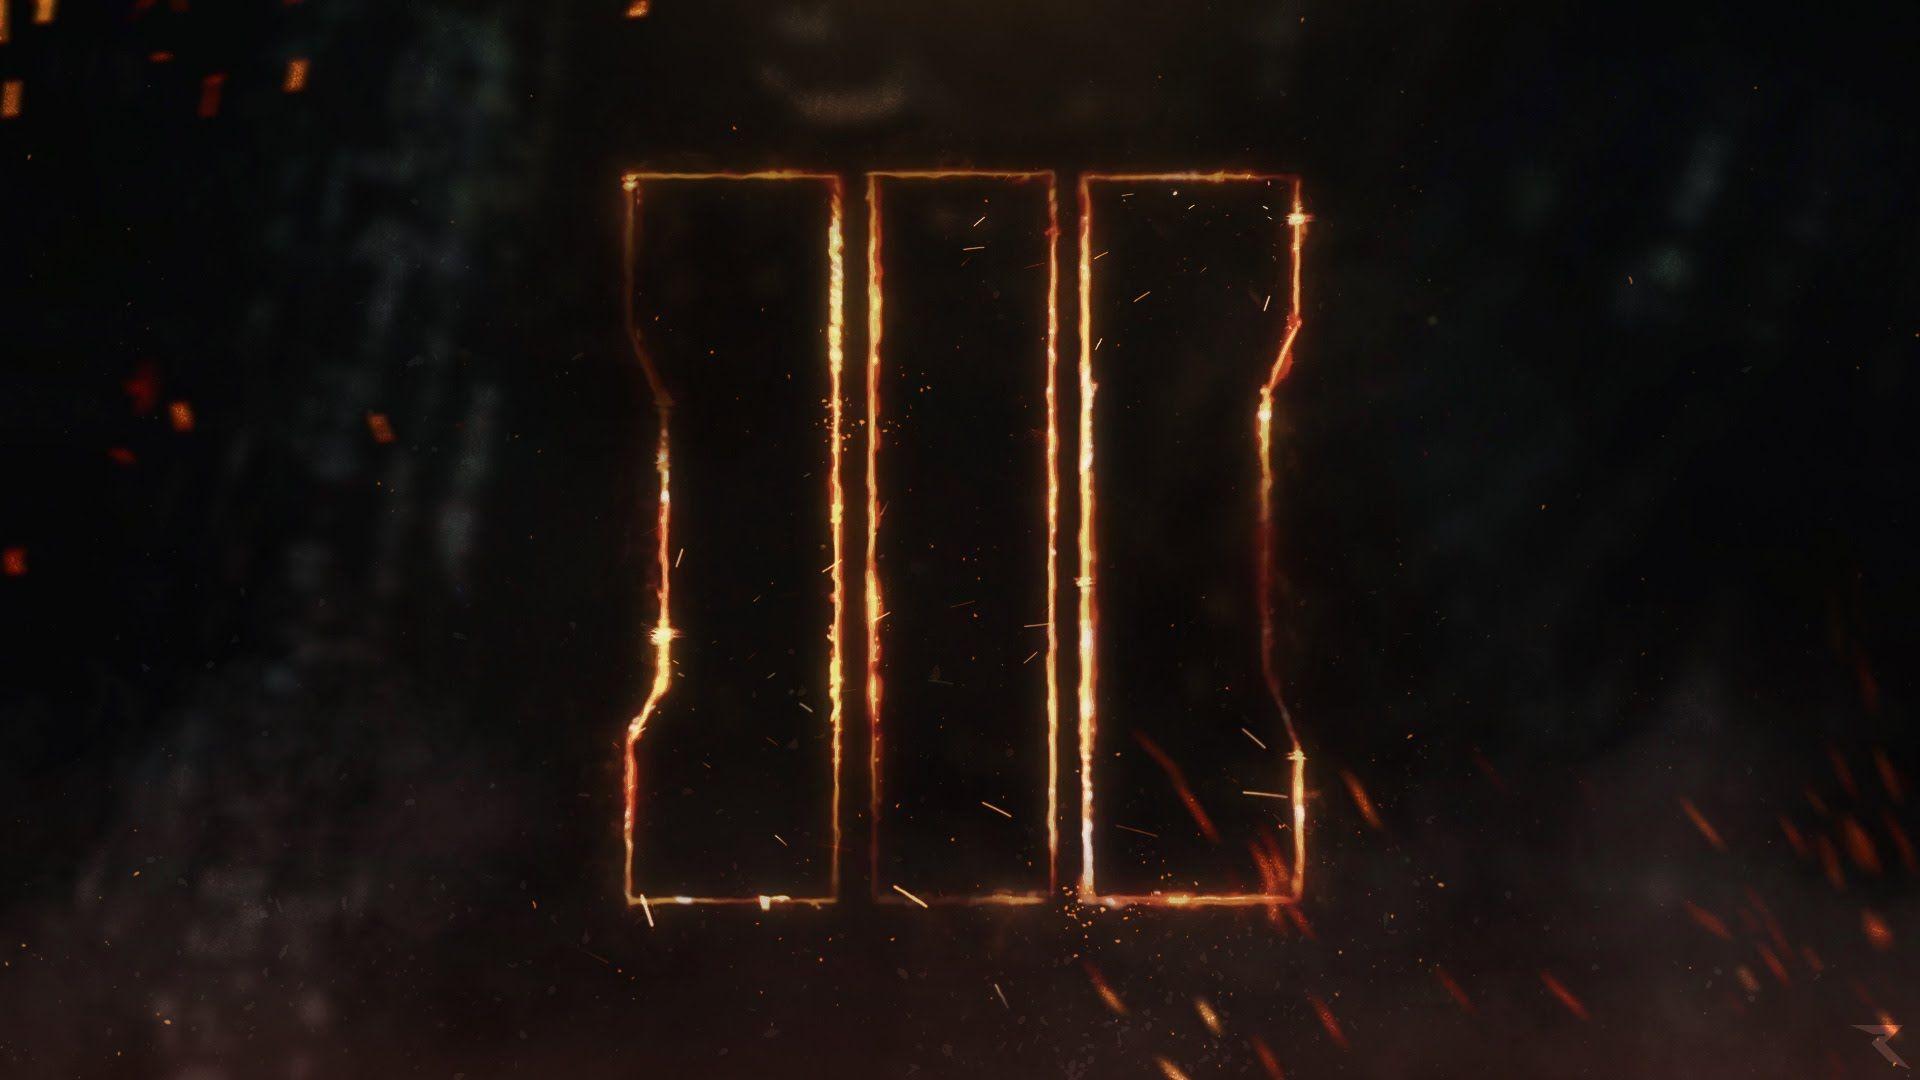 Free Call of Duty Black Ops 3 Wallpaper